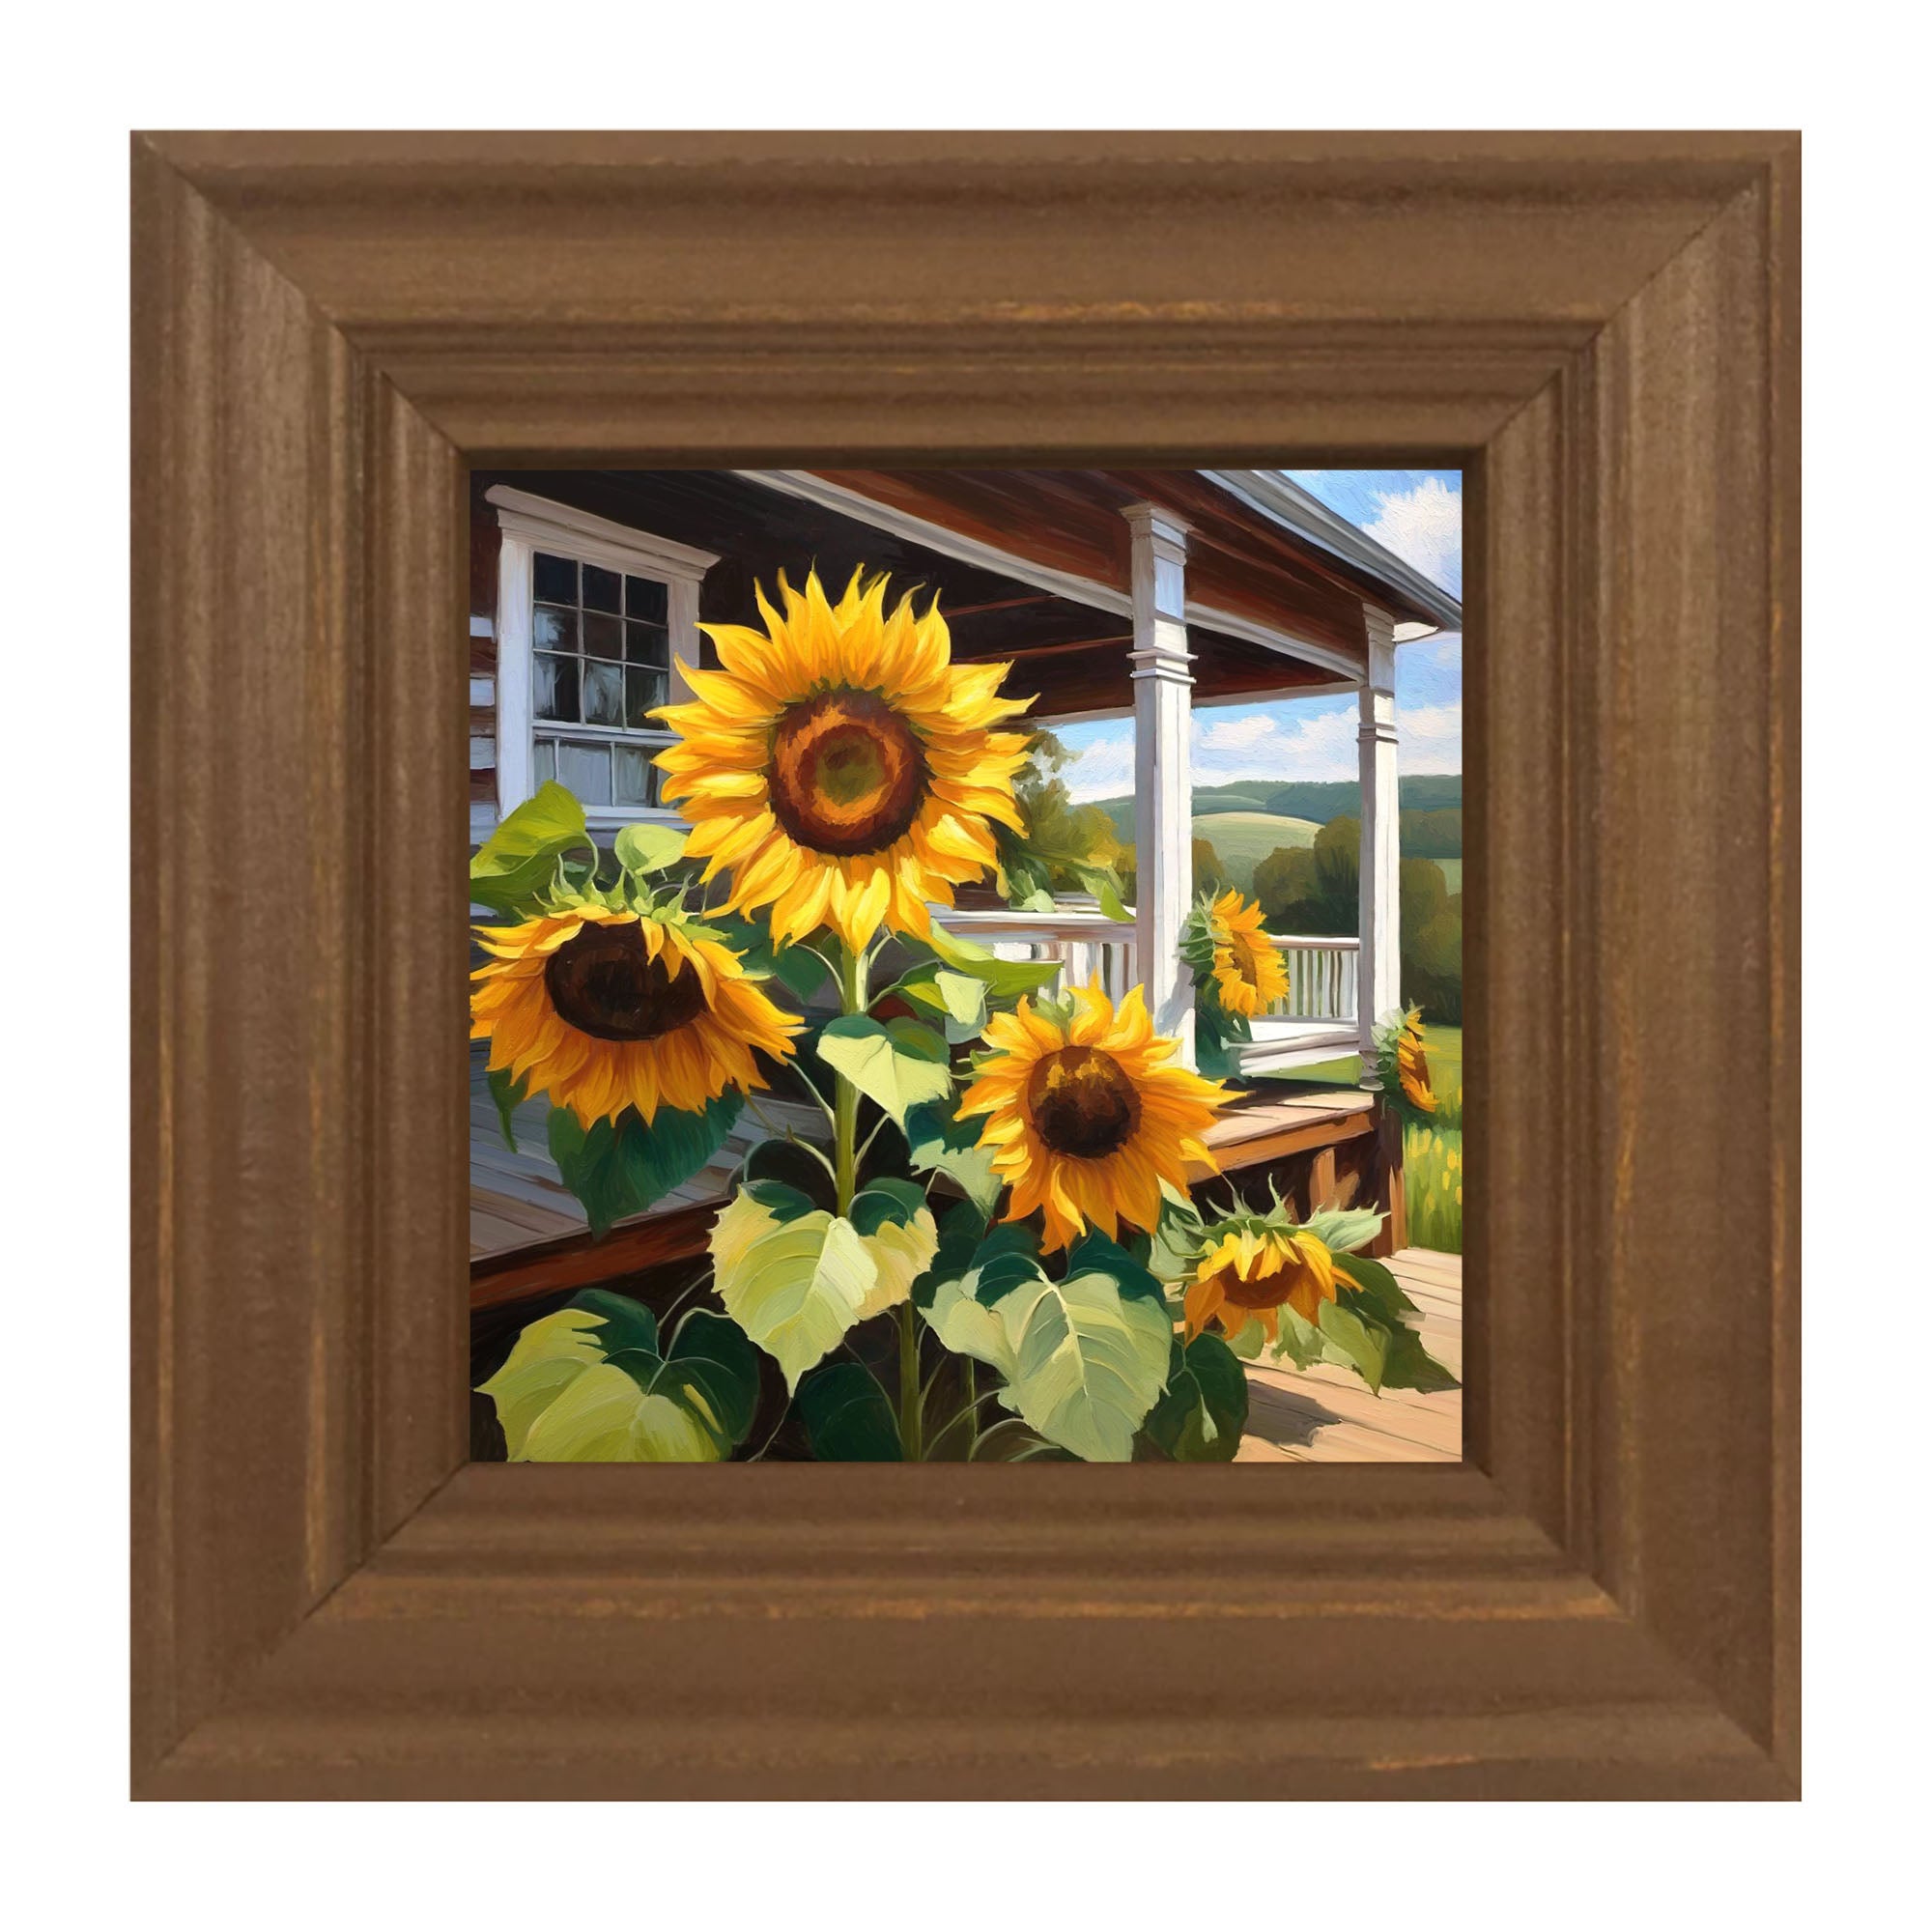 Sunflowers on a porch